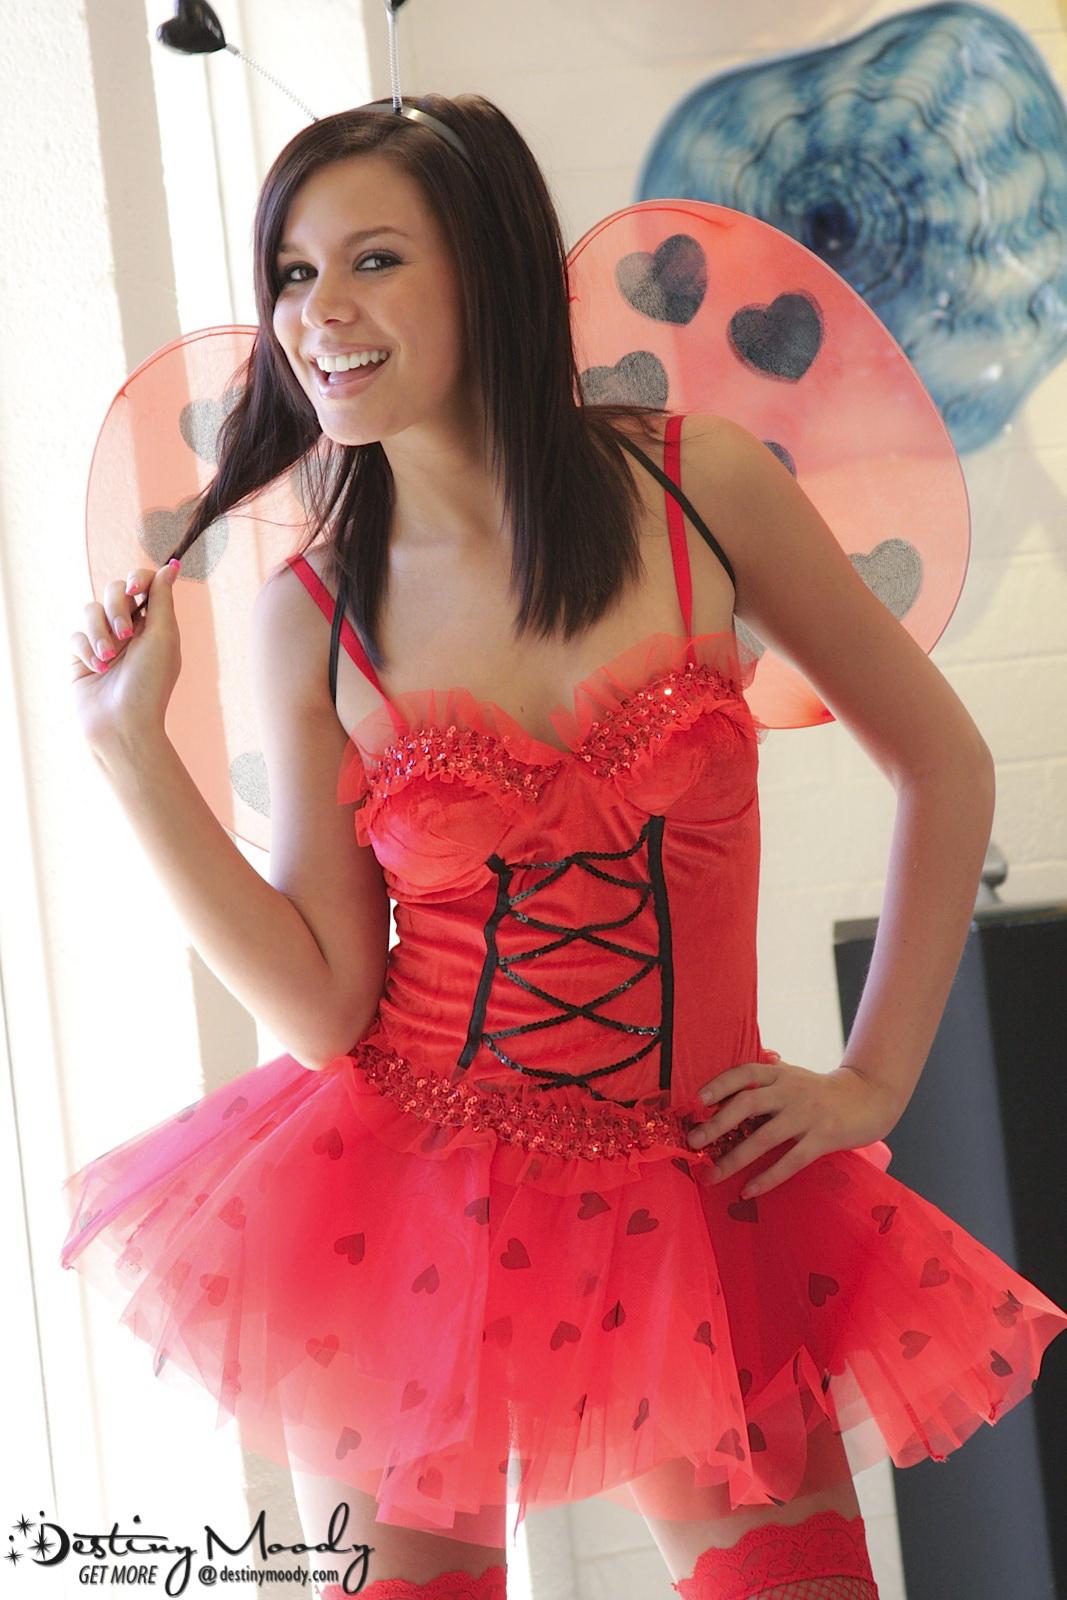 The delicious Destiny Moody is a cute as a bug on a rug in her sexy ladybug costume #54041606